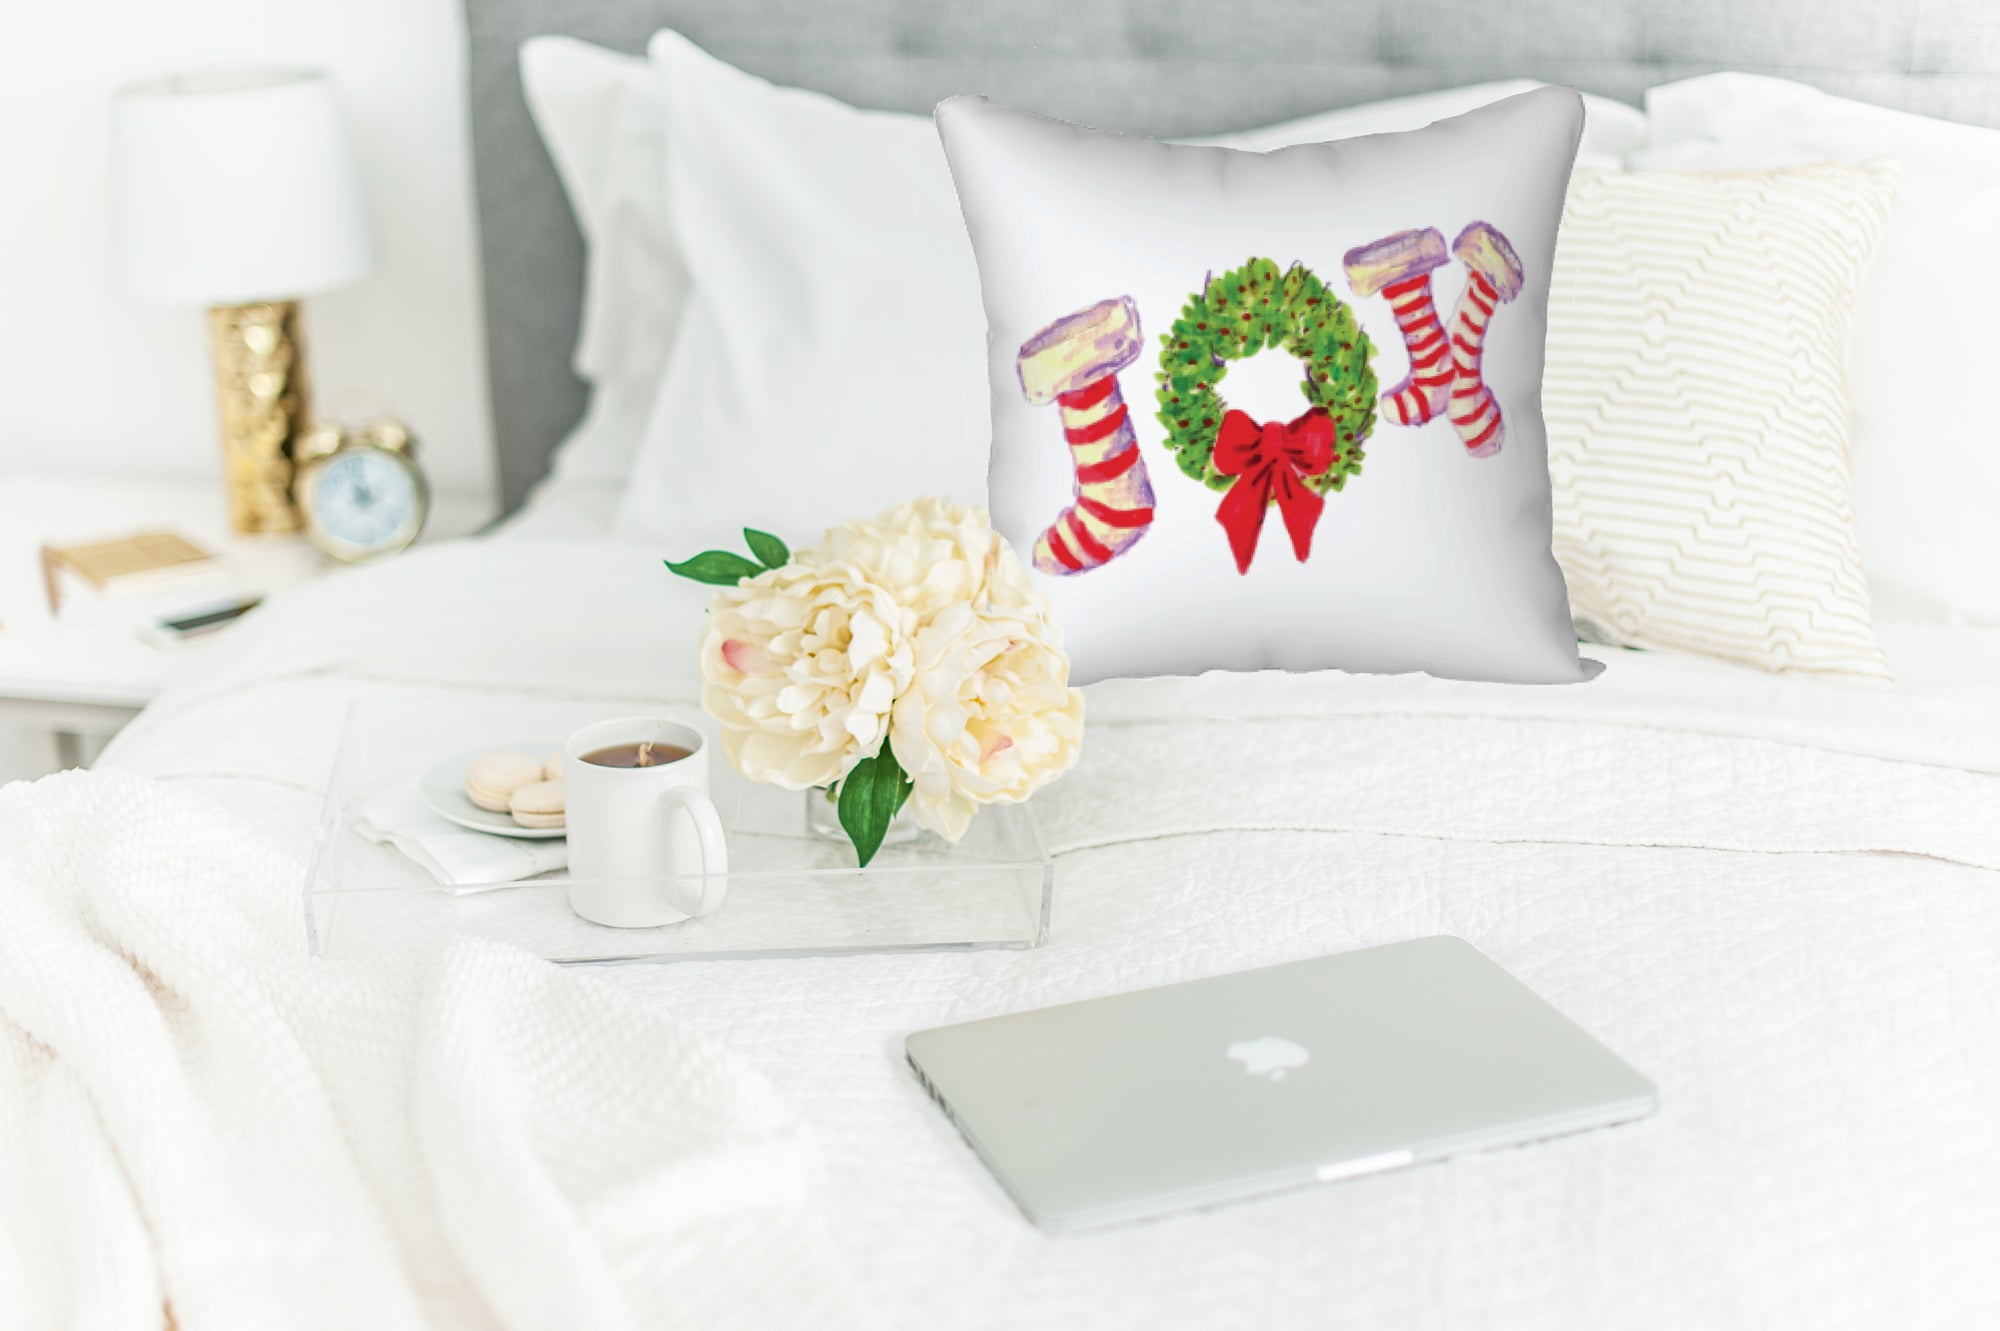 Joy to the World with this festive Joy Pillow. Watercolor image printed onto this square pillow. Will add a pop of festivity to any Christmas Holiday. There is a wreath painted in the middle of the two stocking letters to create the word JOY. White background with red and white striped stockings.